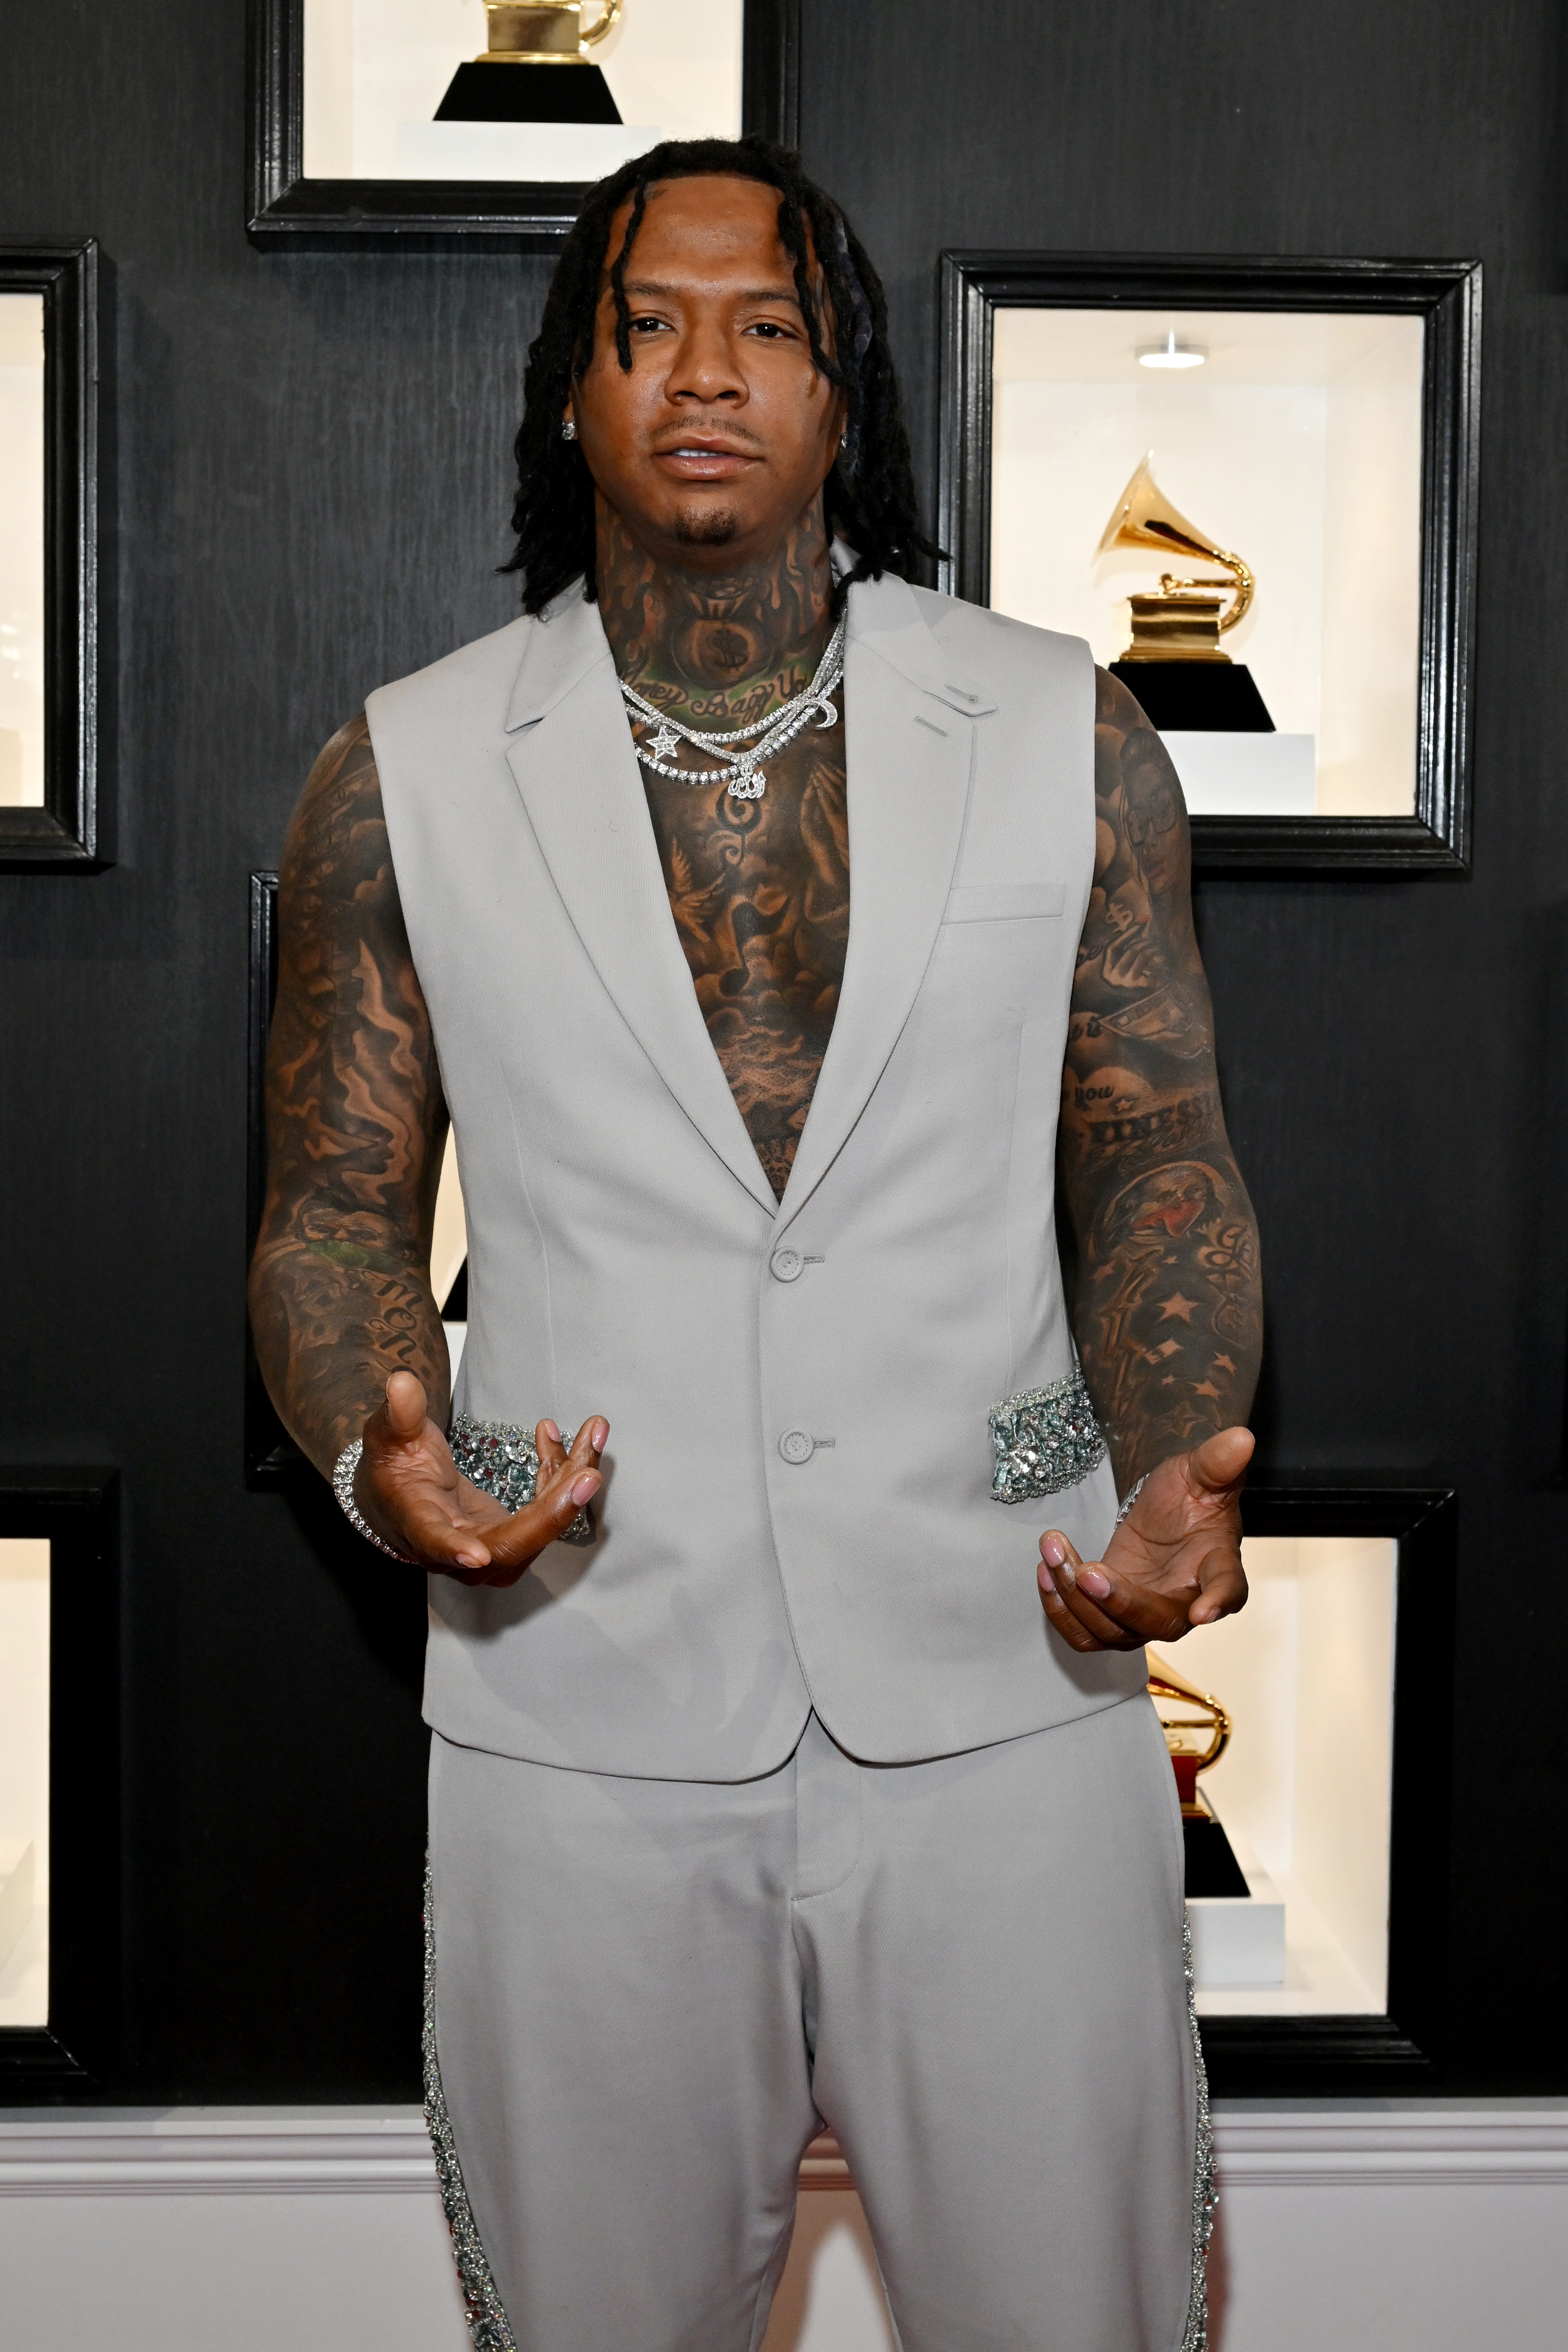 Moneybagg Yo poses at the 65th GRAMMY Awards on February 5, 2023, in Los Angeles, California | Source: Getty Images